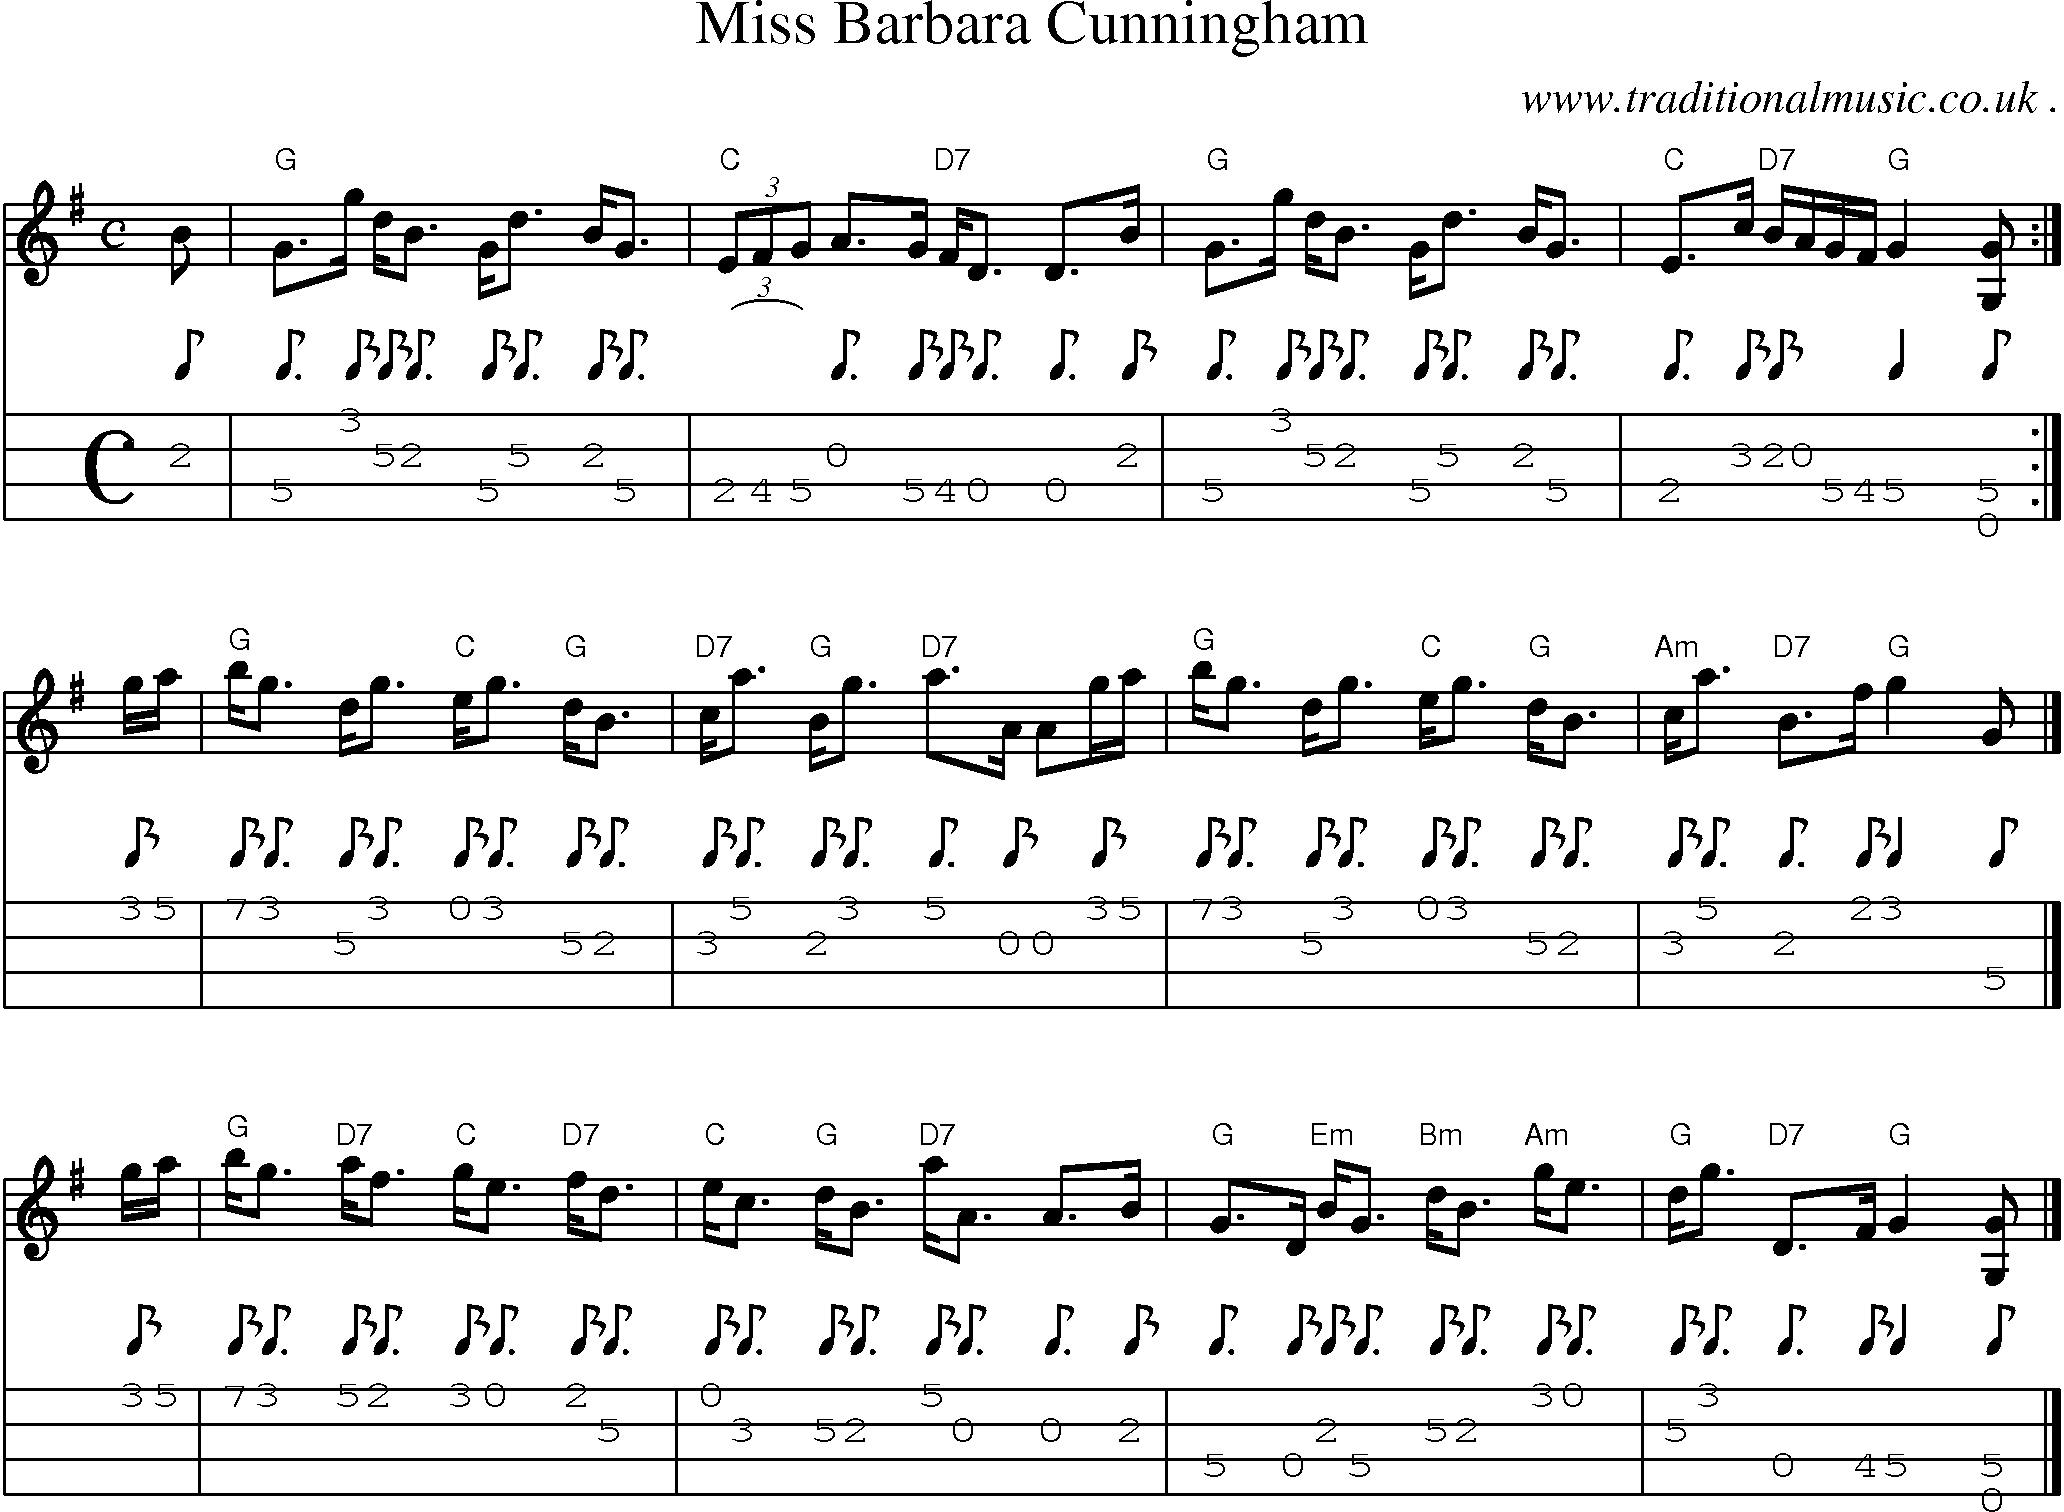 Sheet-music  score, Chords and Mandolin Tabs for Miss Barbara Cunningham